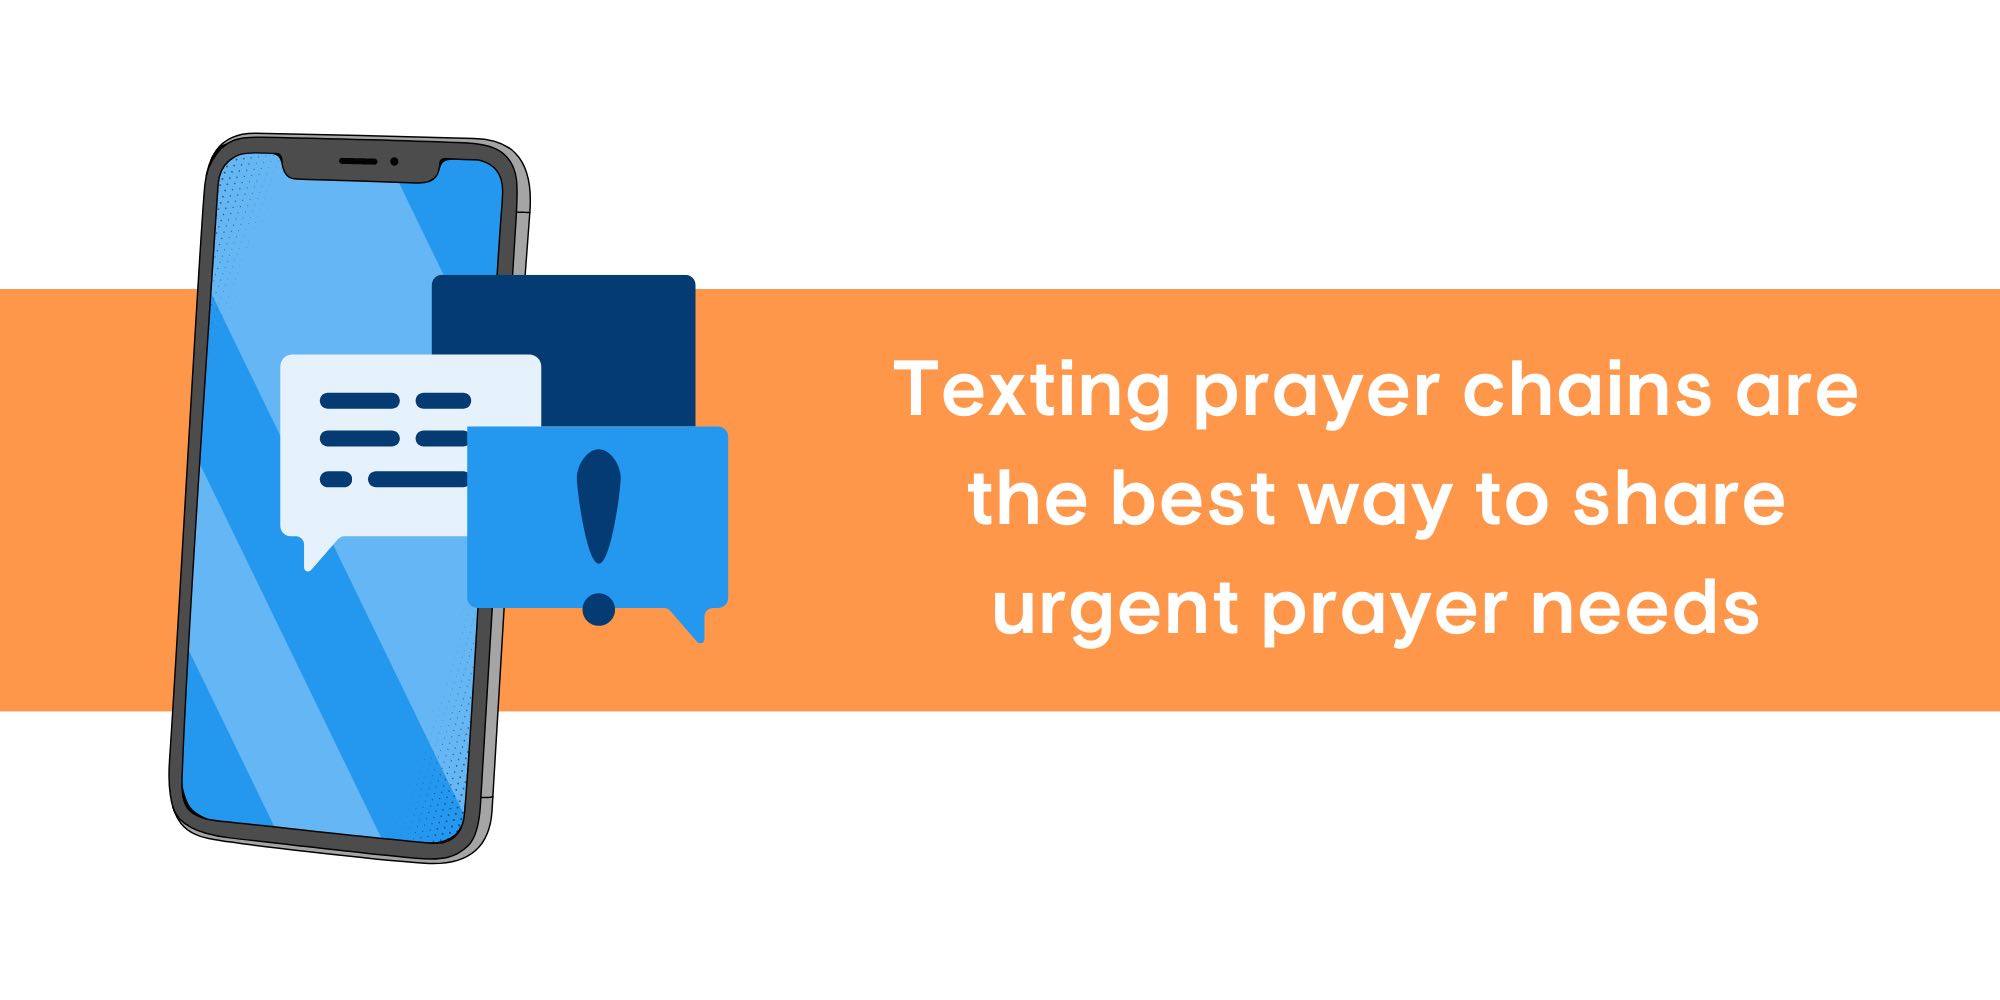 SMS prayer chains are great for getting prayer needs out quickly